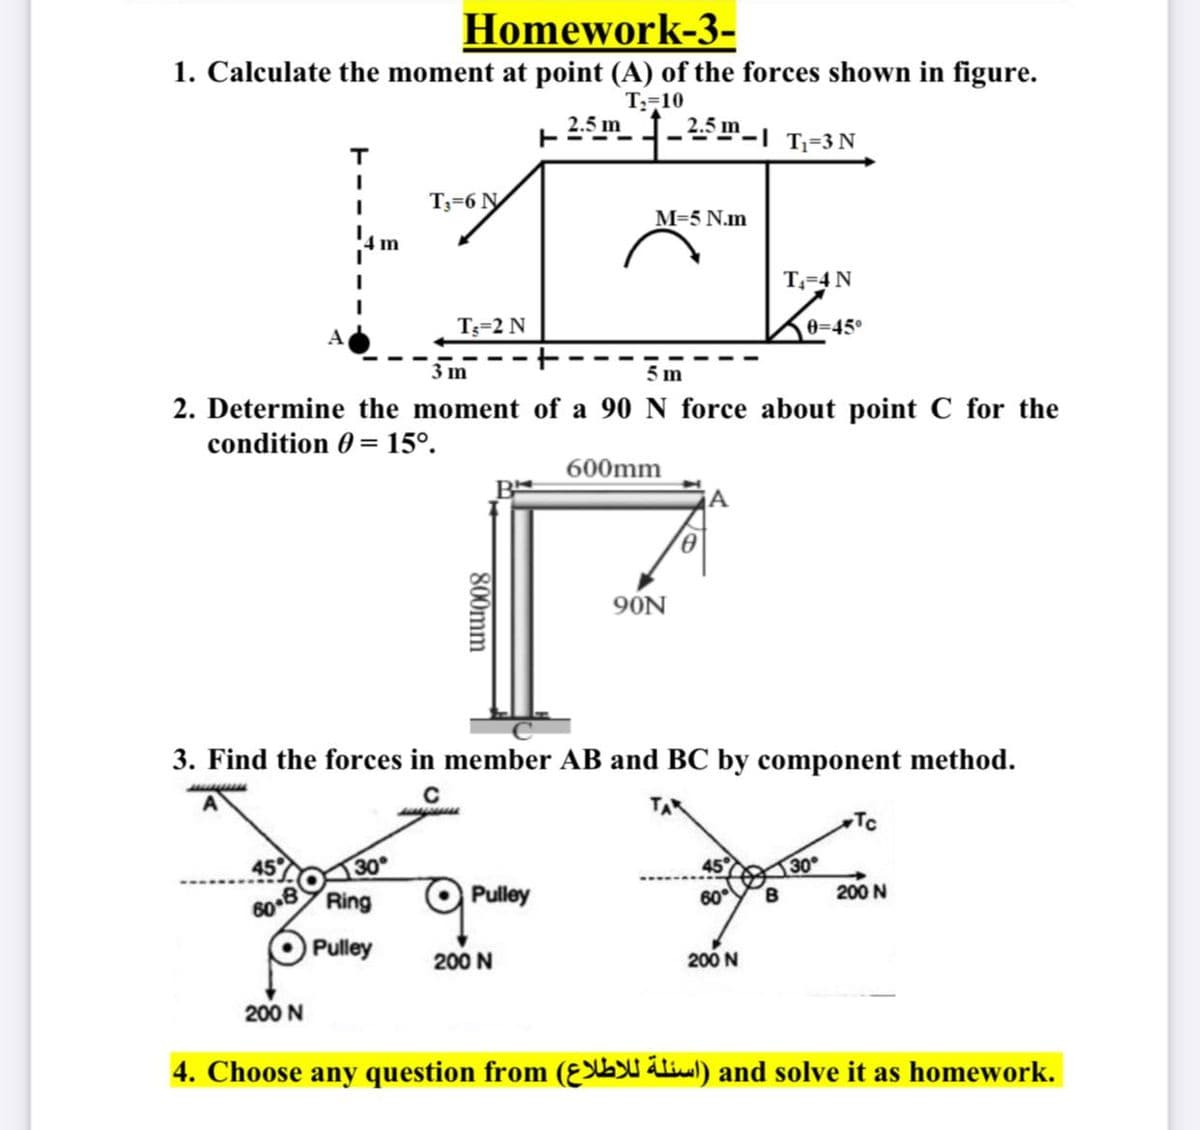 Homework-3-
1. Calculate the moment at point (A) of the forces shown in figure.
T;=10
2.5 m_-4
2.5 m
- "-I T=3N
т
T3=6 N
M=5 N.m
T-4 N
T3=2 N
0-45°
3 m
5 m
2. Determine the moment of a 90 N force about point C for the
condition 0 = 15°.
600mm
9ÓN
3. Find the forces in member AB and BC by component method.
C
Tc
45
30
45°
30
Ring
Pulley
60YB
200 N
Pulley
200 N
200 N
200 N
4. Choose any question from (Ɛ ) and solve it as homework.
800mm
